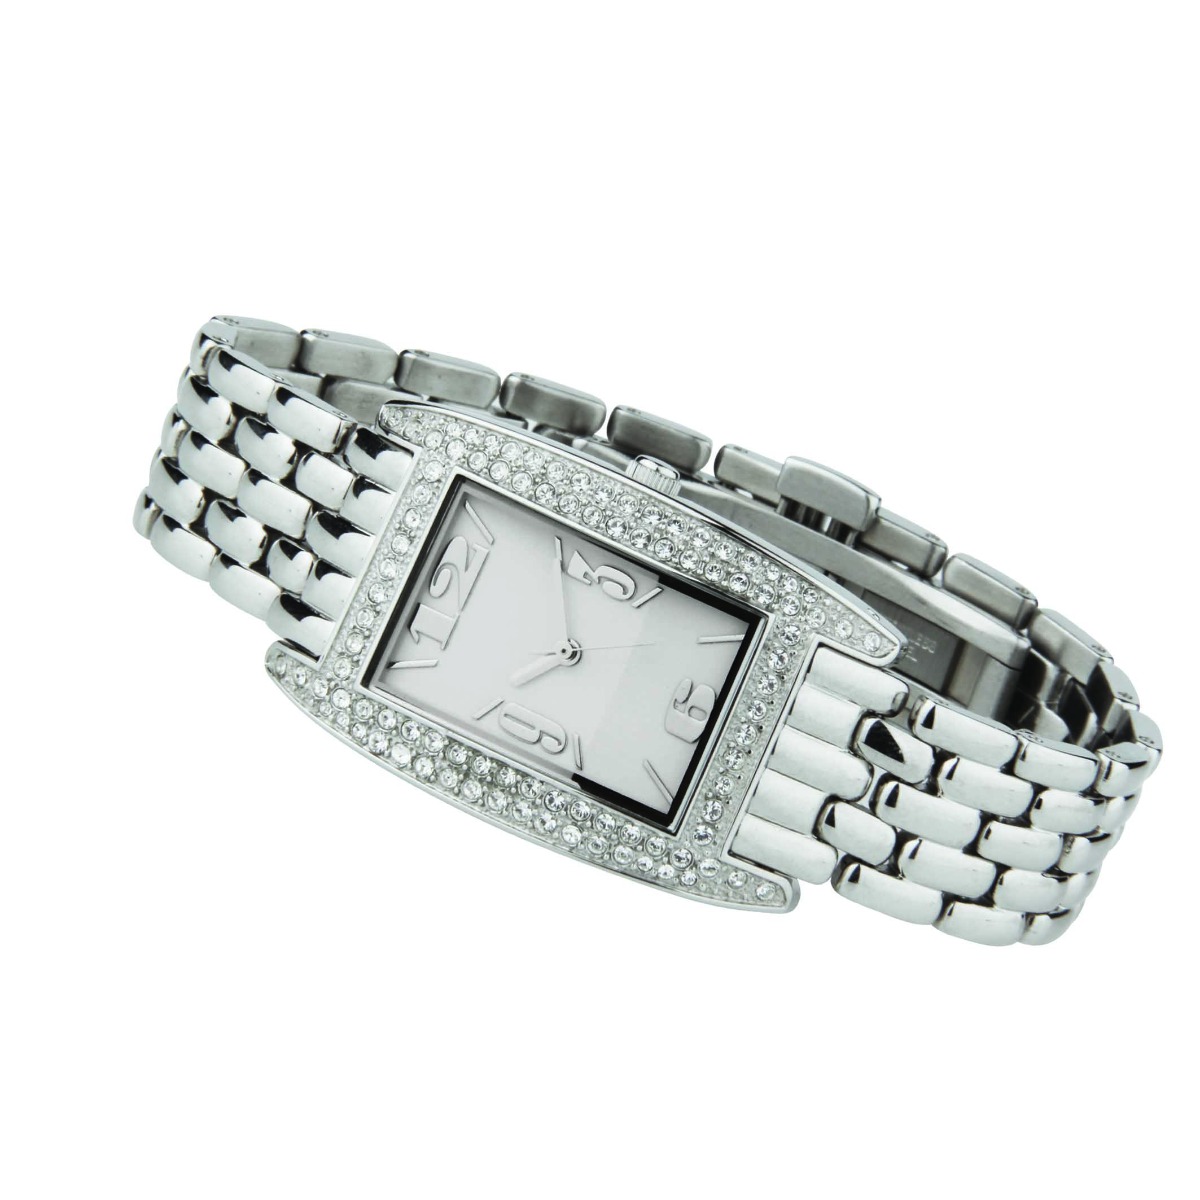  Lady analog watch with relief index